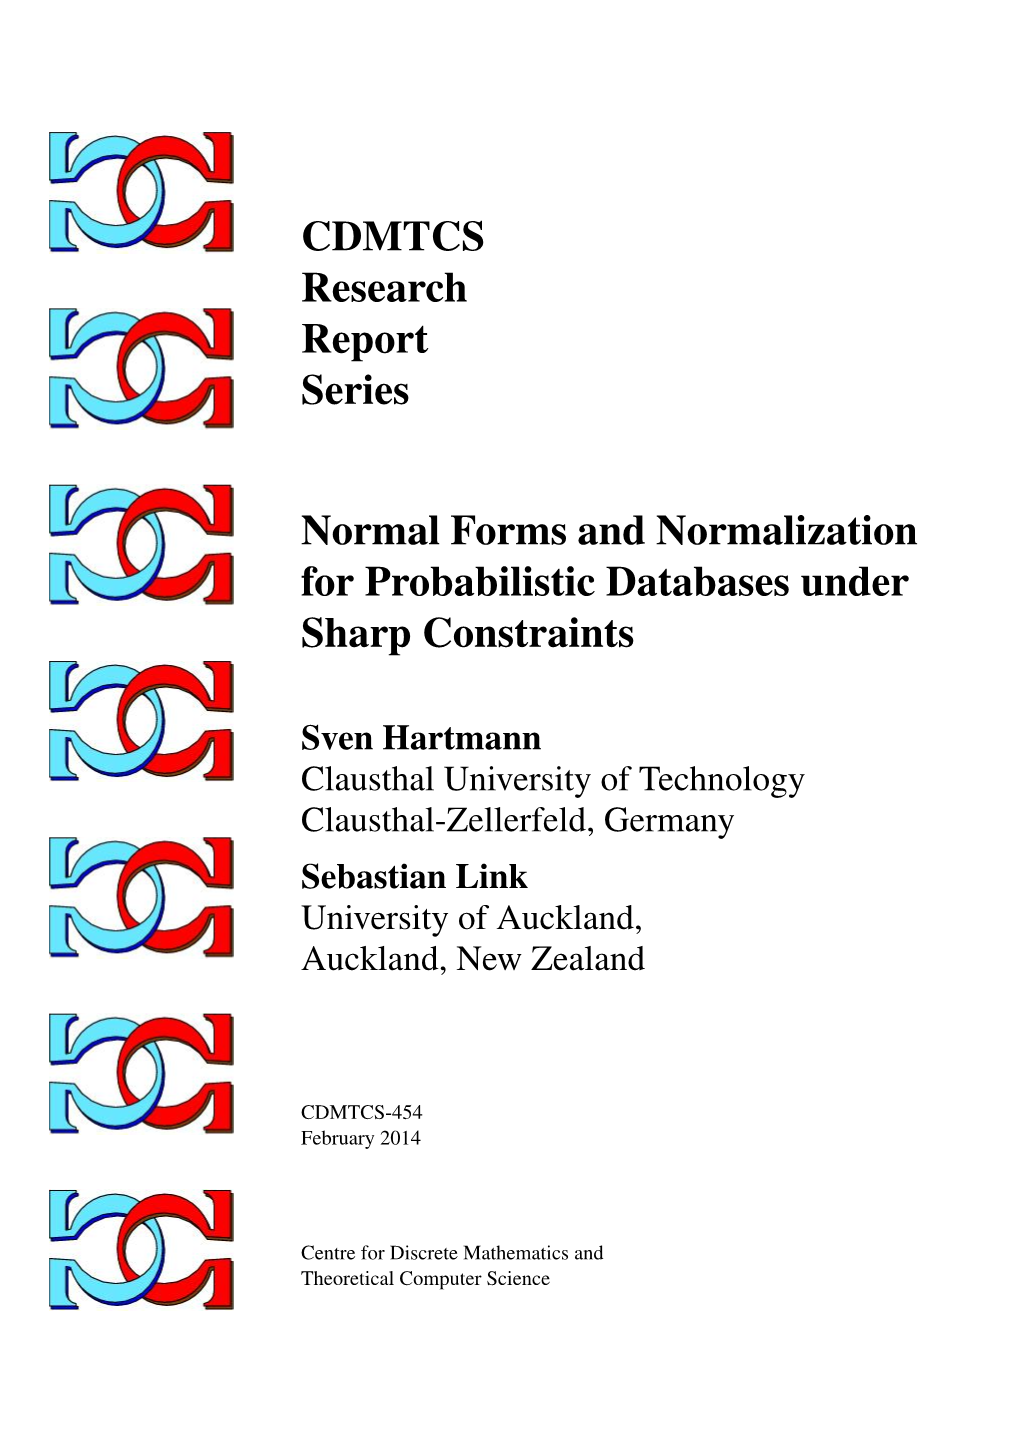 CDMTCS Research Report Series Normal Forms and Normalization